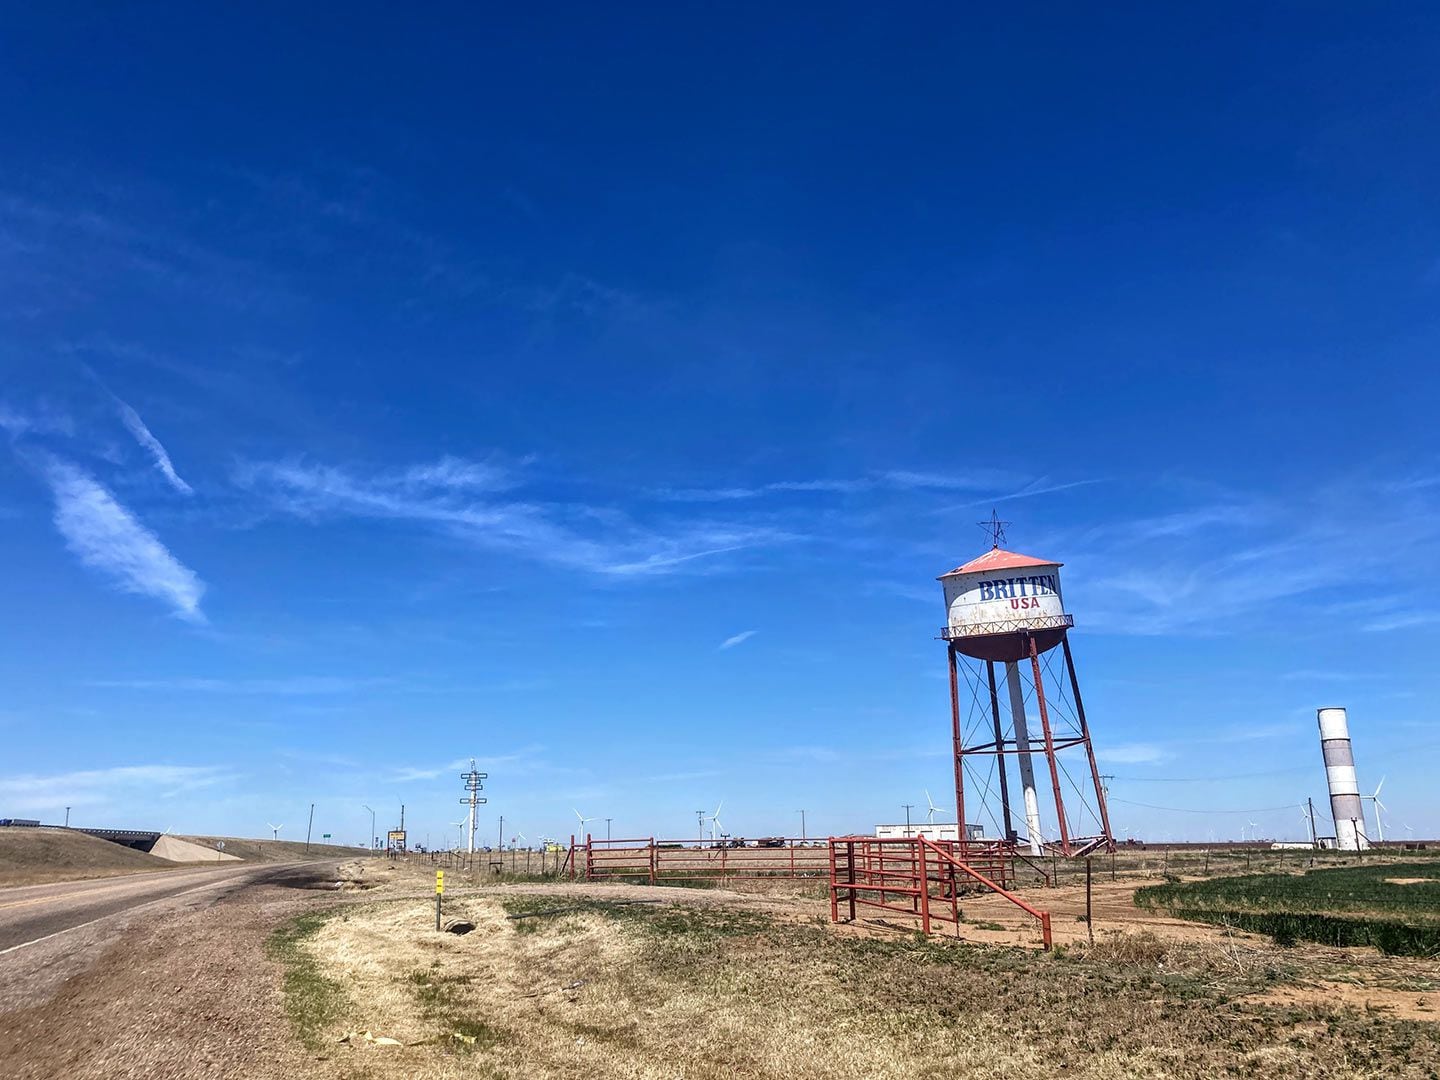 When people pull over, they spend money: the Leaning Tower of Britten, in Groom, Texas.